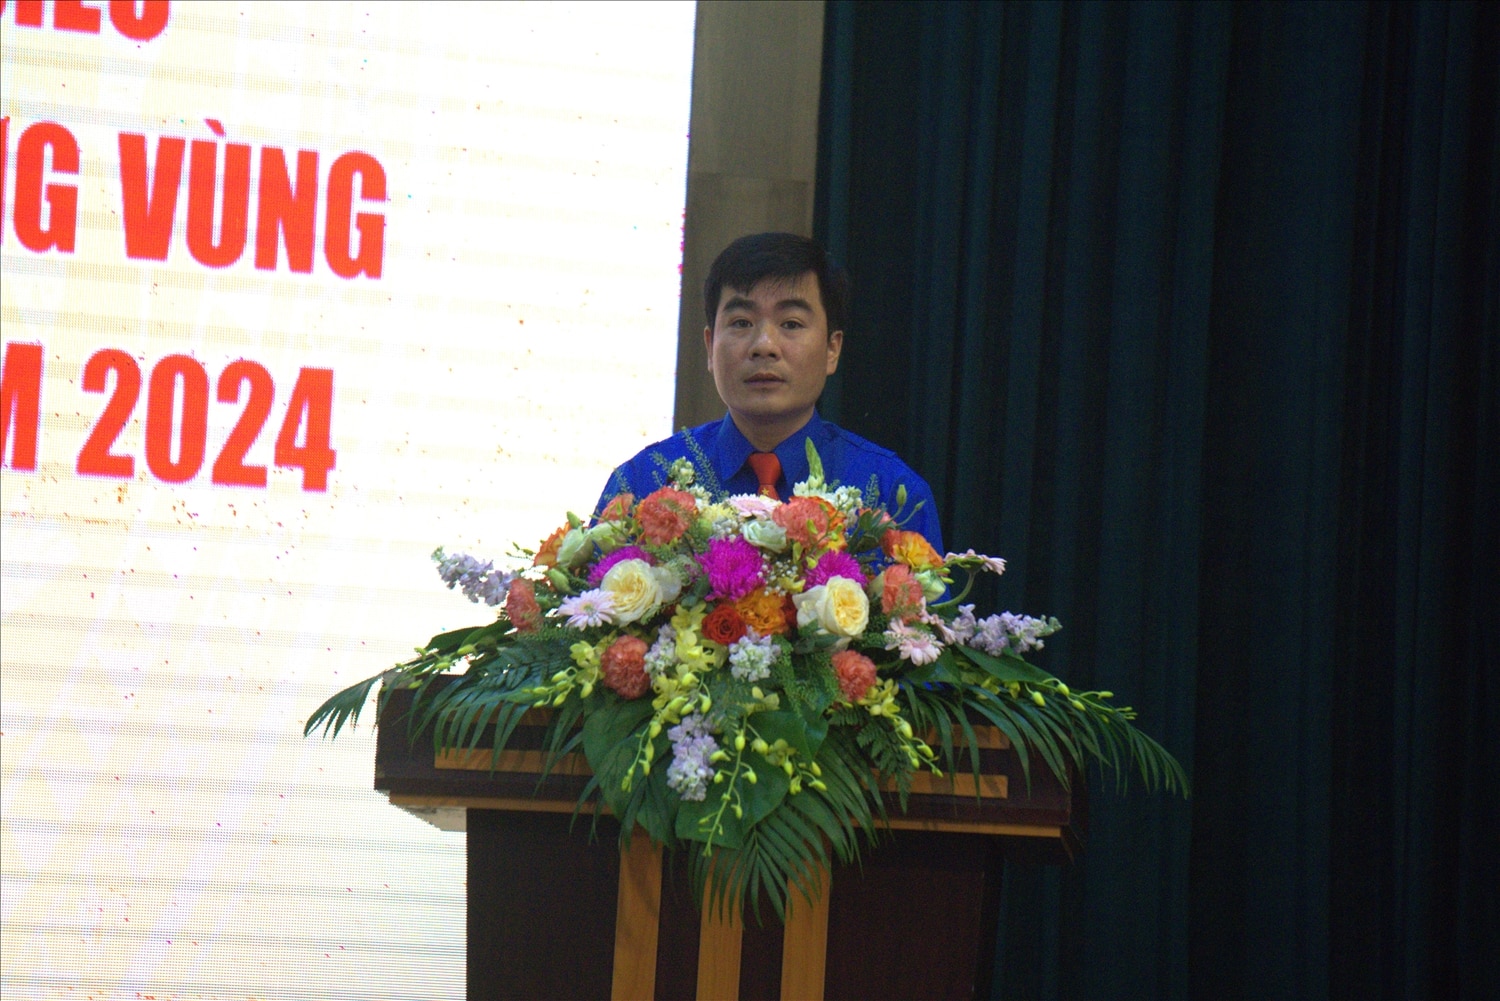 Mr. Le Van Chau, Provincial Party Committee member, Secretary of Thanh Hoa Provincial Youth Union spoke at the Conference